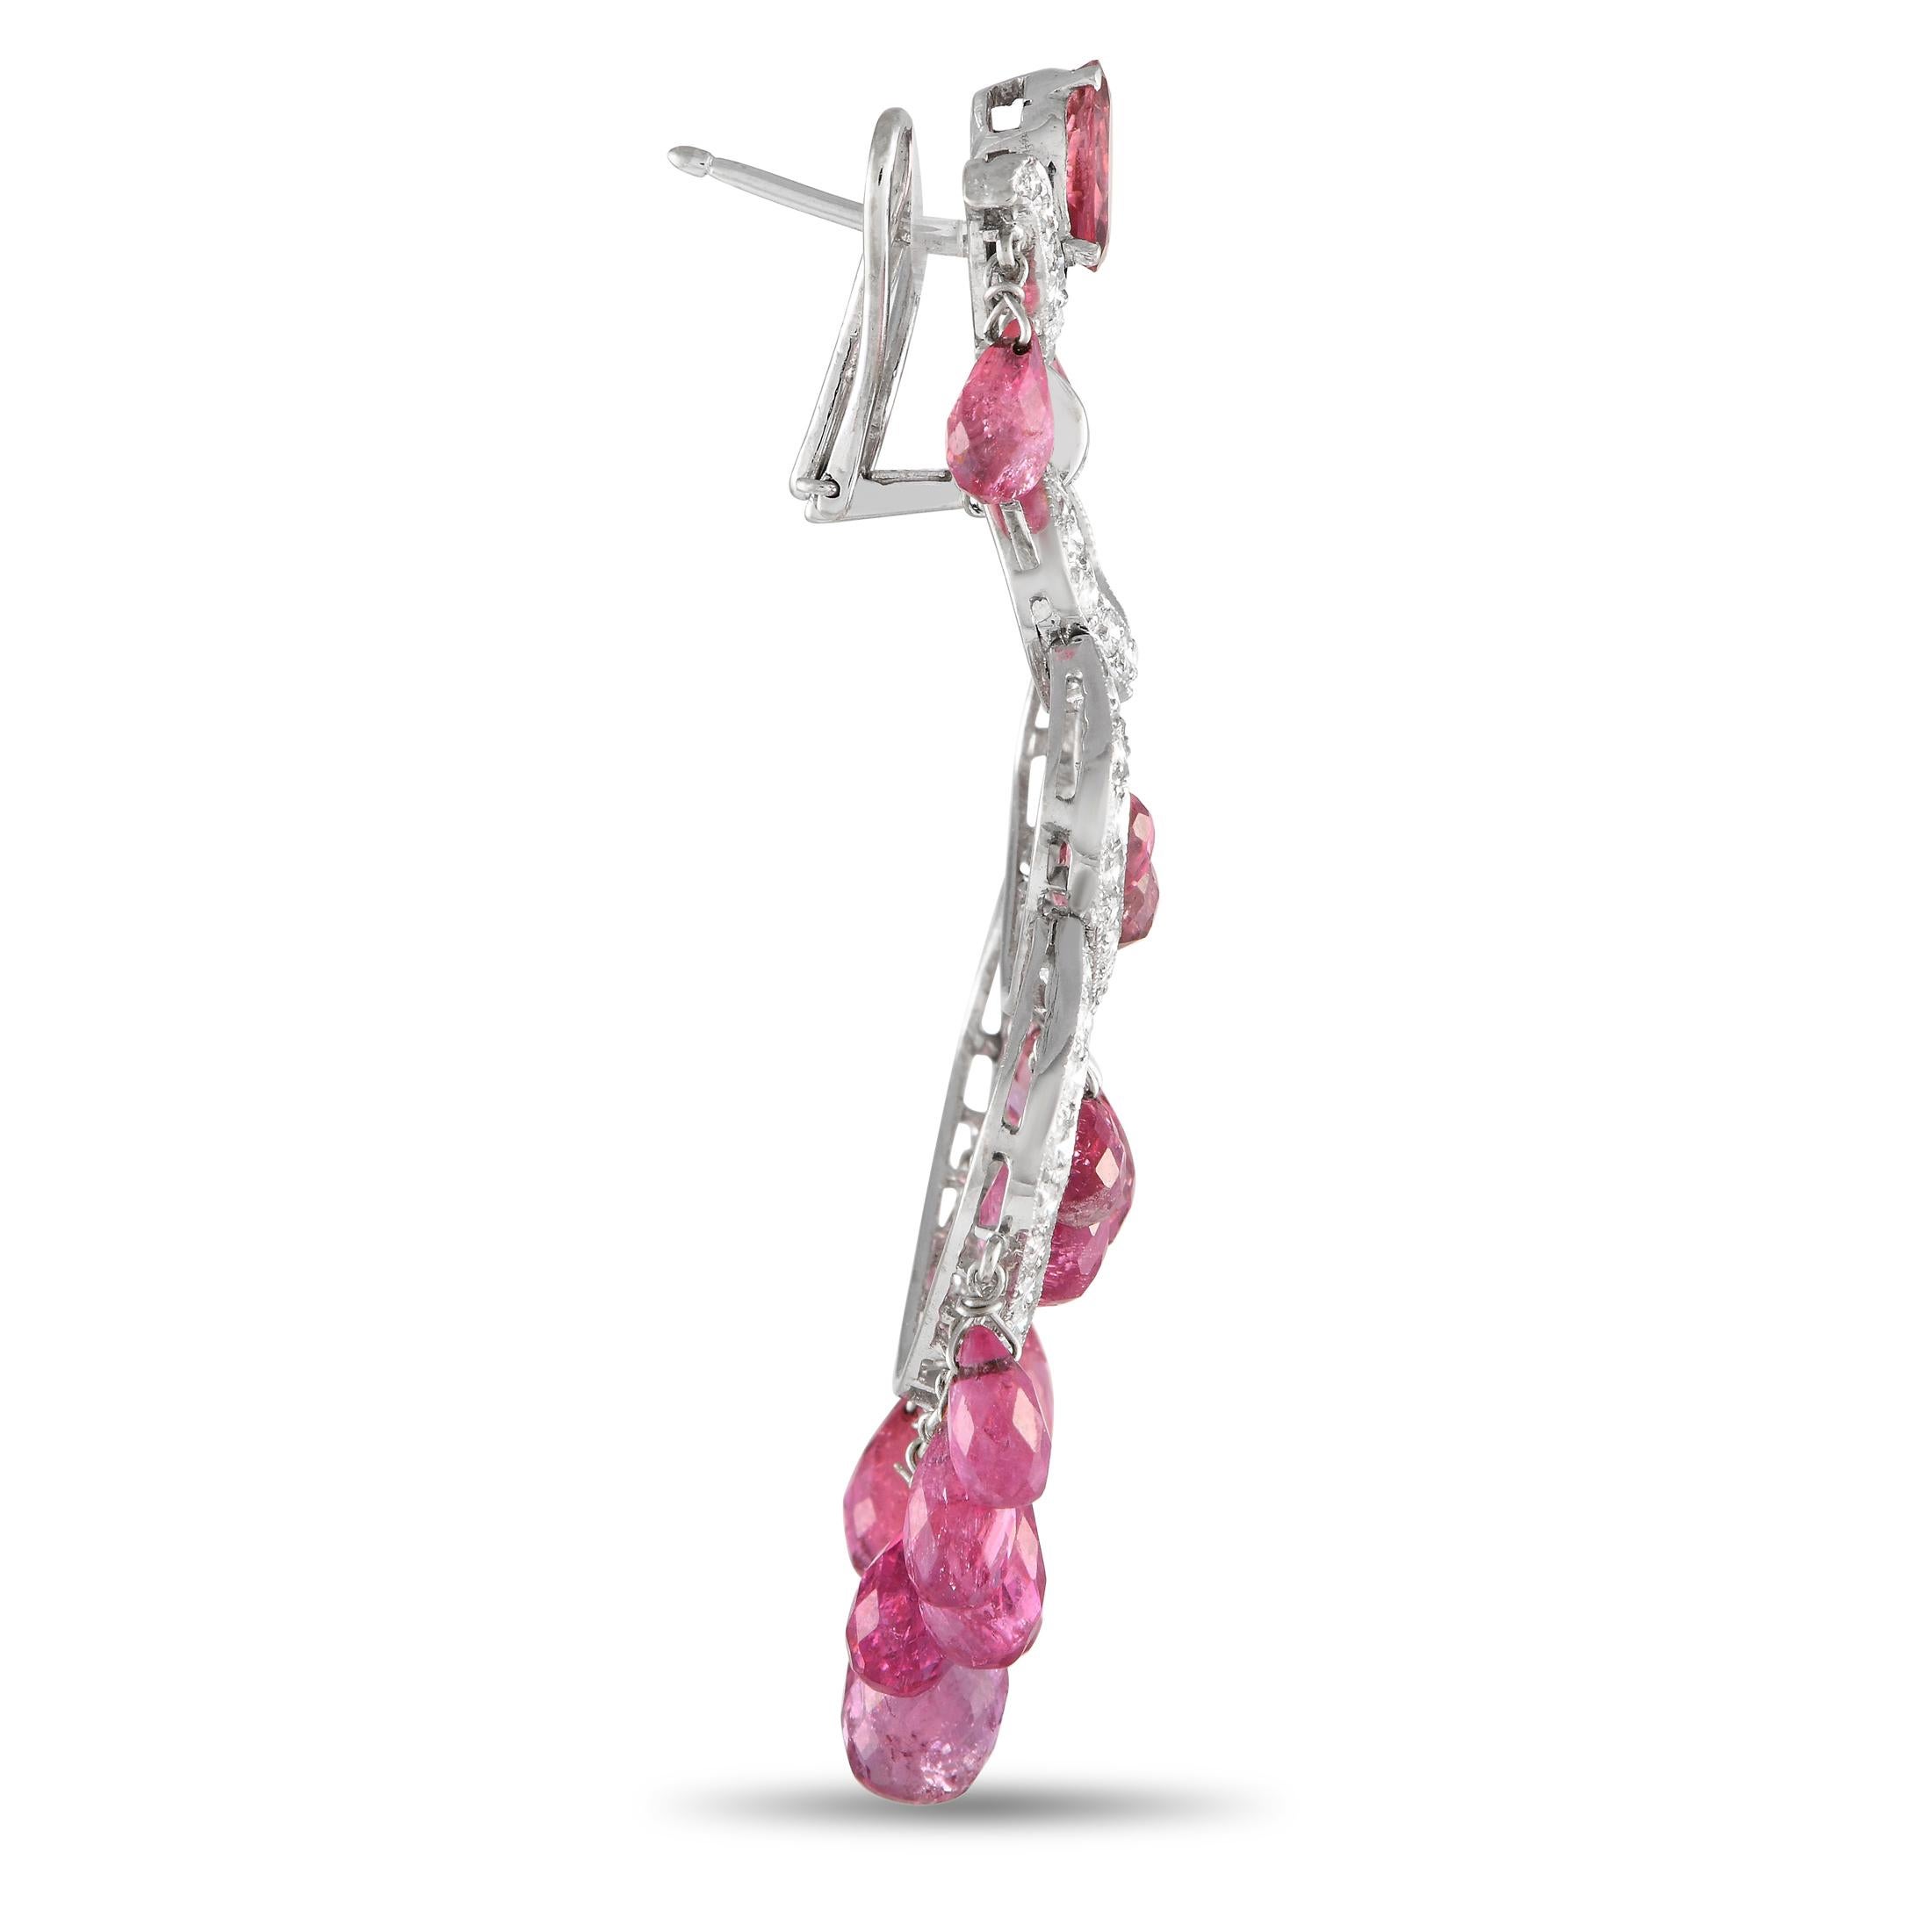 This is the sweet, shimmering detail your monochromatic evening outfit needs. These chandelier earrings feature a tiered design with petite round diamonds tracing each tier's outline. Faceted tourmalines in a beautiful bright pink tone swing from